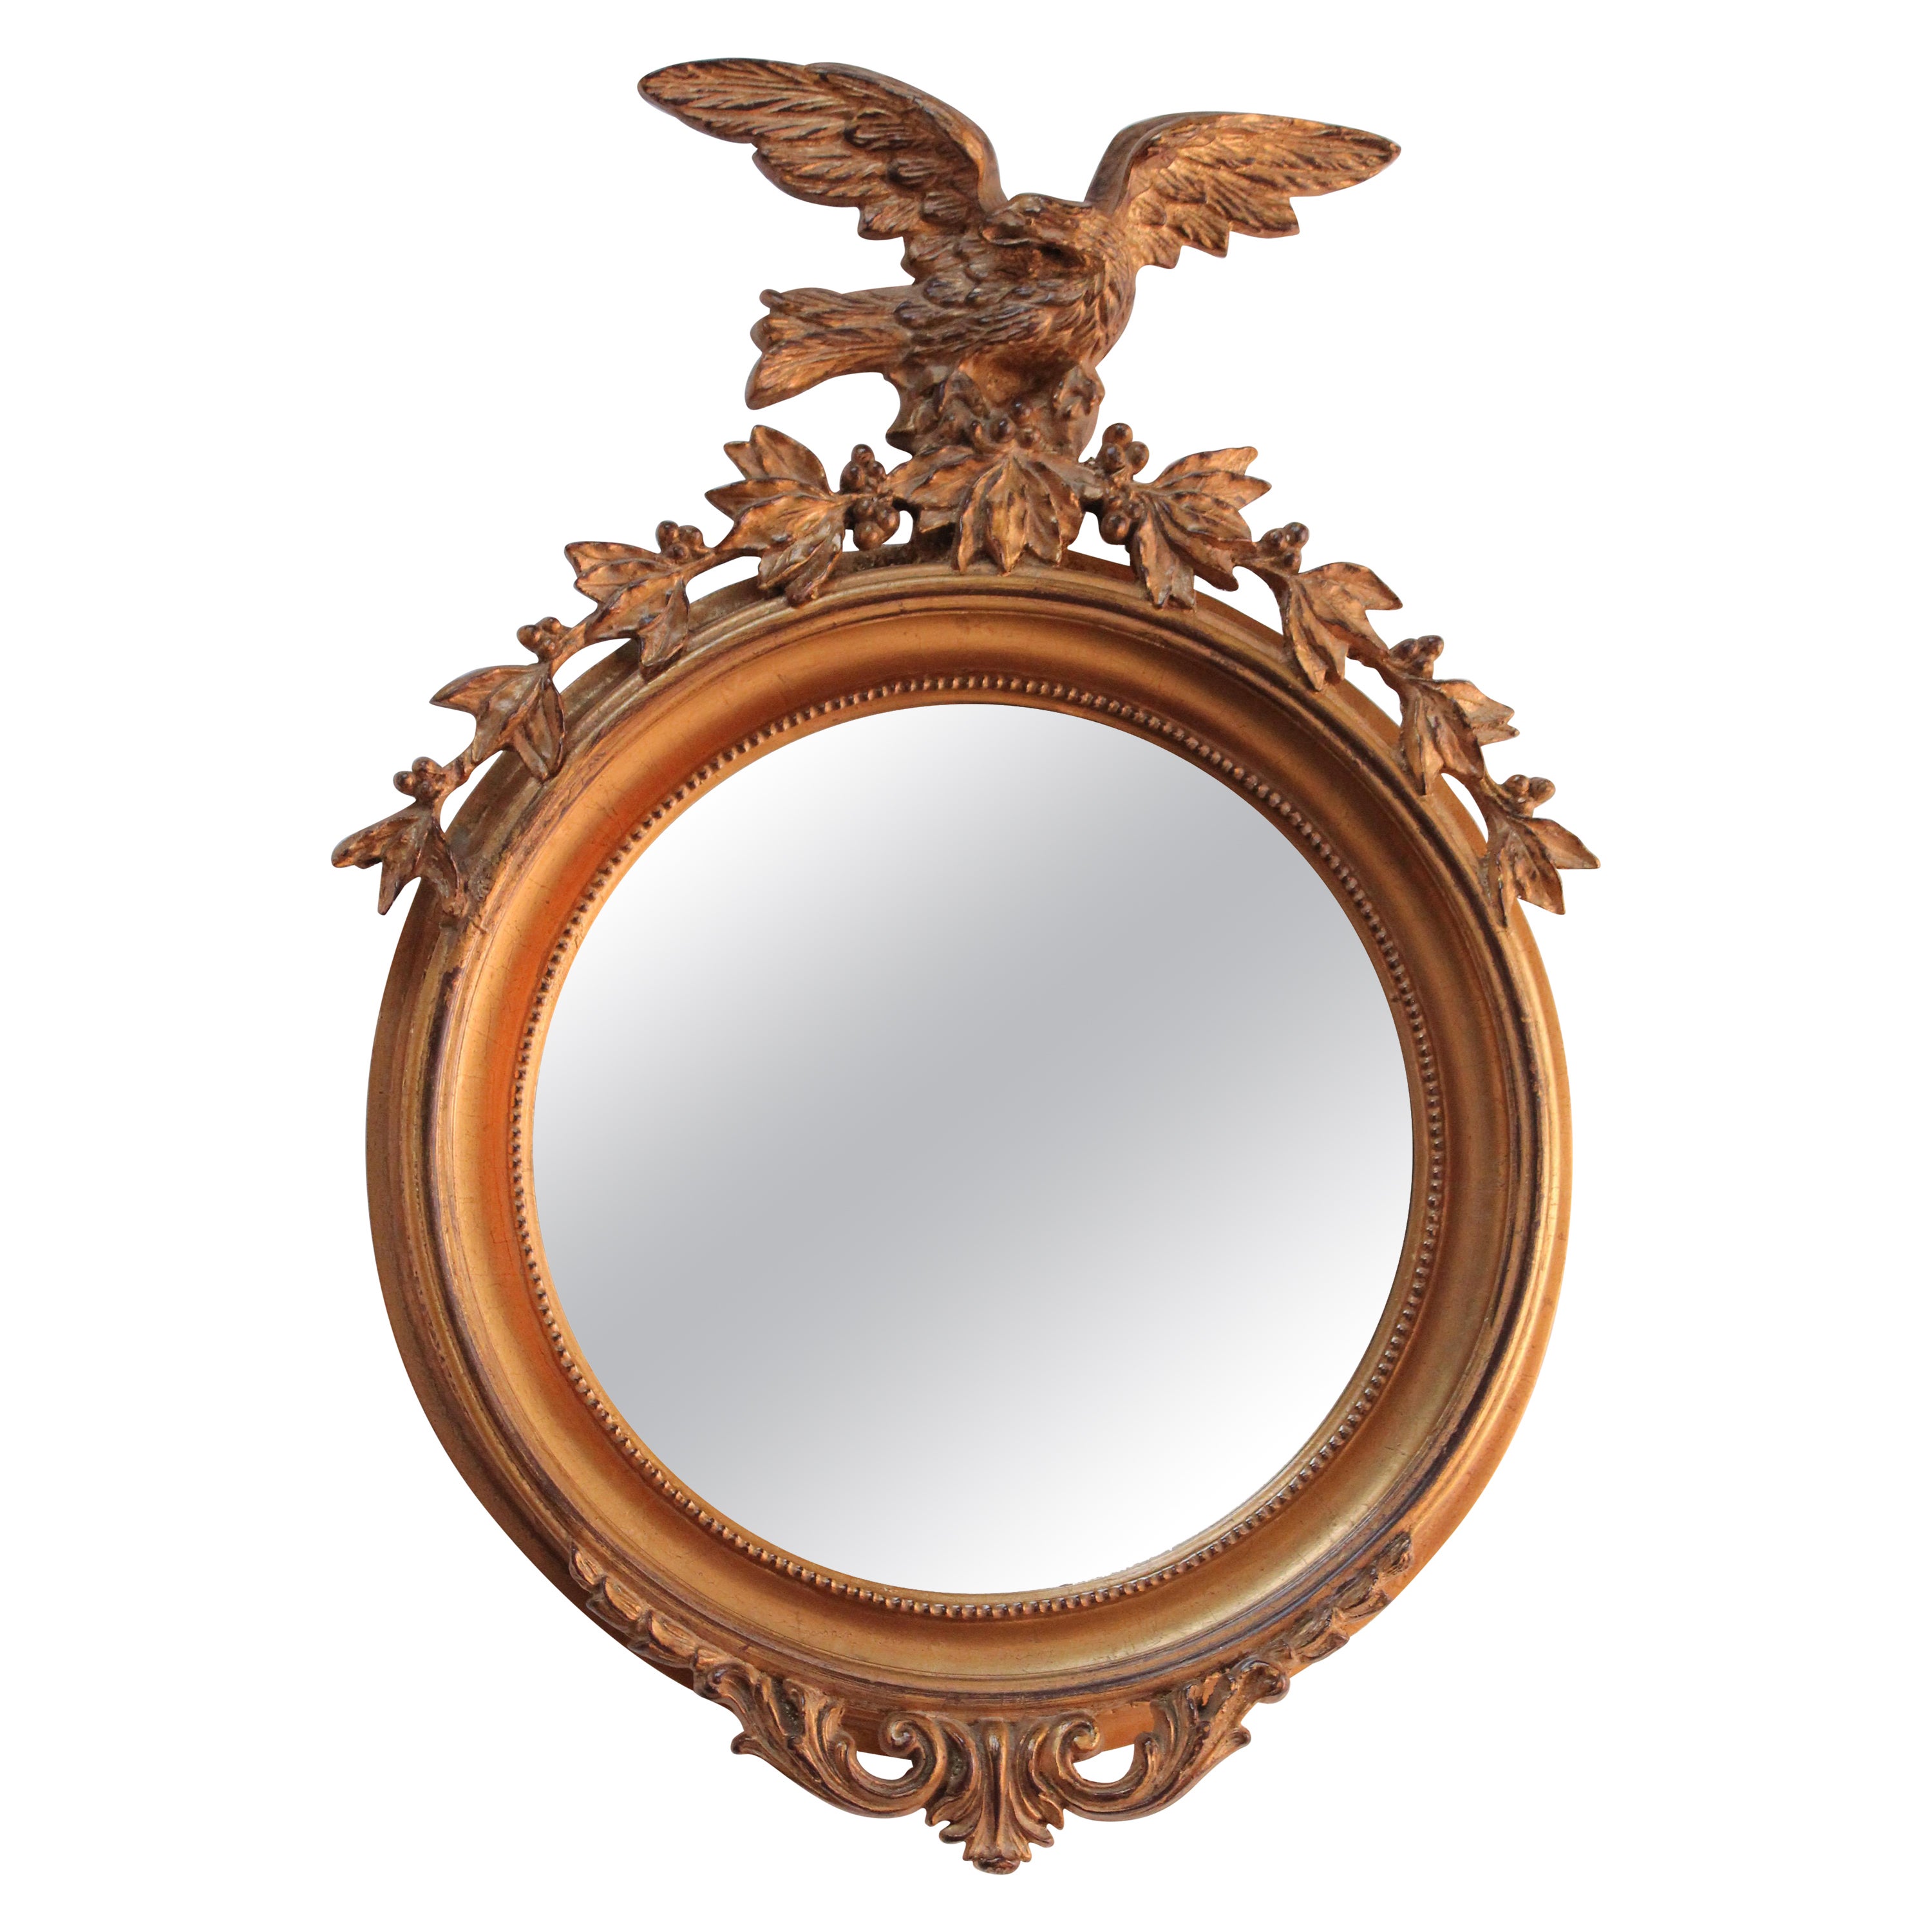 American Regency-Style Perched Eagle Acanthus Giltwood Wall Mirror For Sale